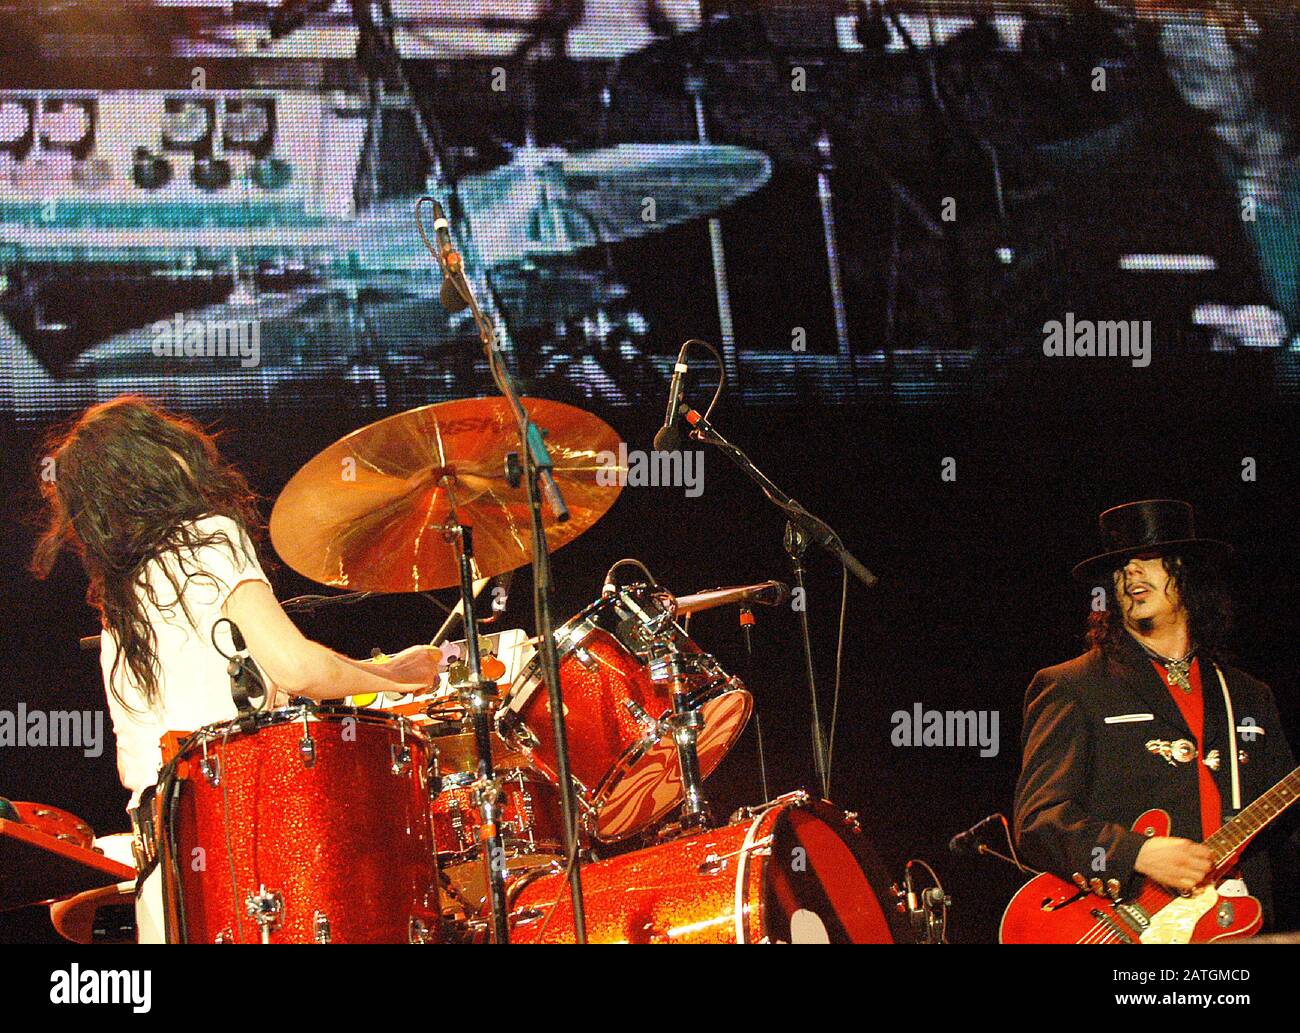 JUNE 10: Meg White and Jack White of The White Stripes open their Get Behind Me Satan Tour with a headlining performance on the first night of Atlanta's Music Midtown Festival on June 10, 2005. CREDIT: Chris McKay / MediaPunch Stock Photo